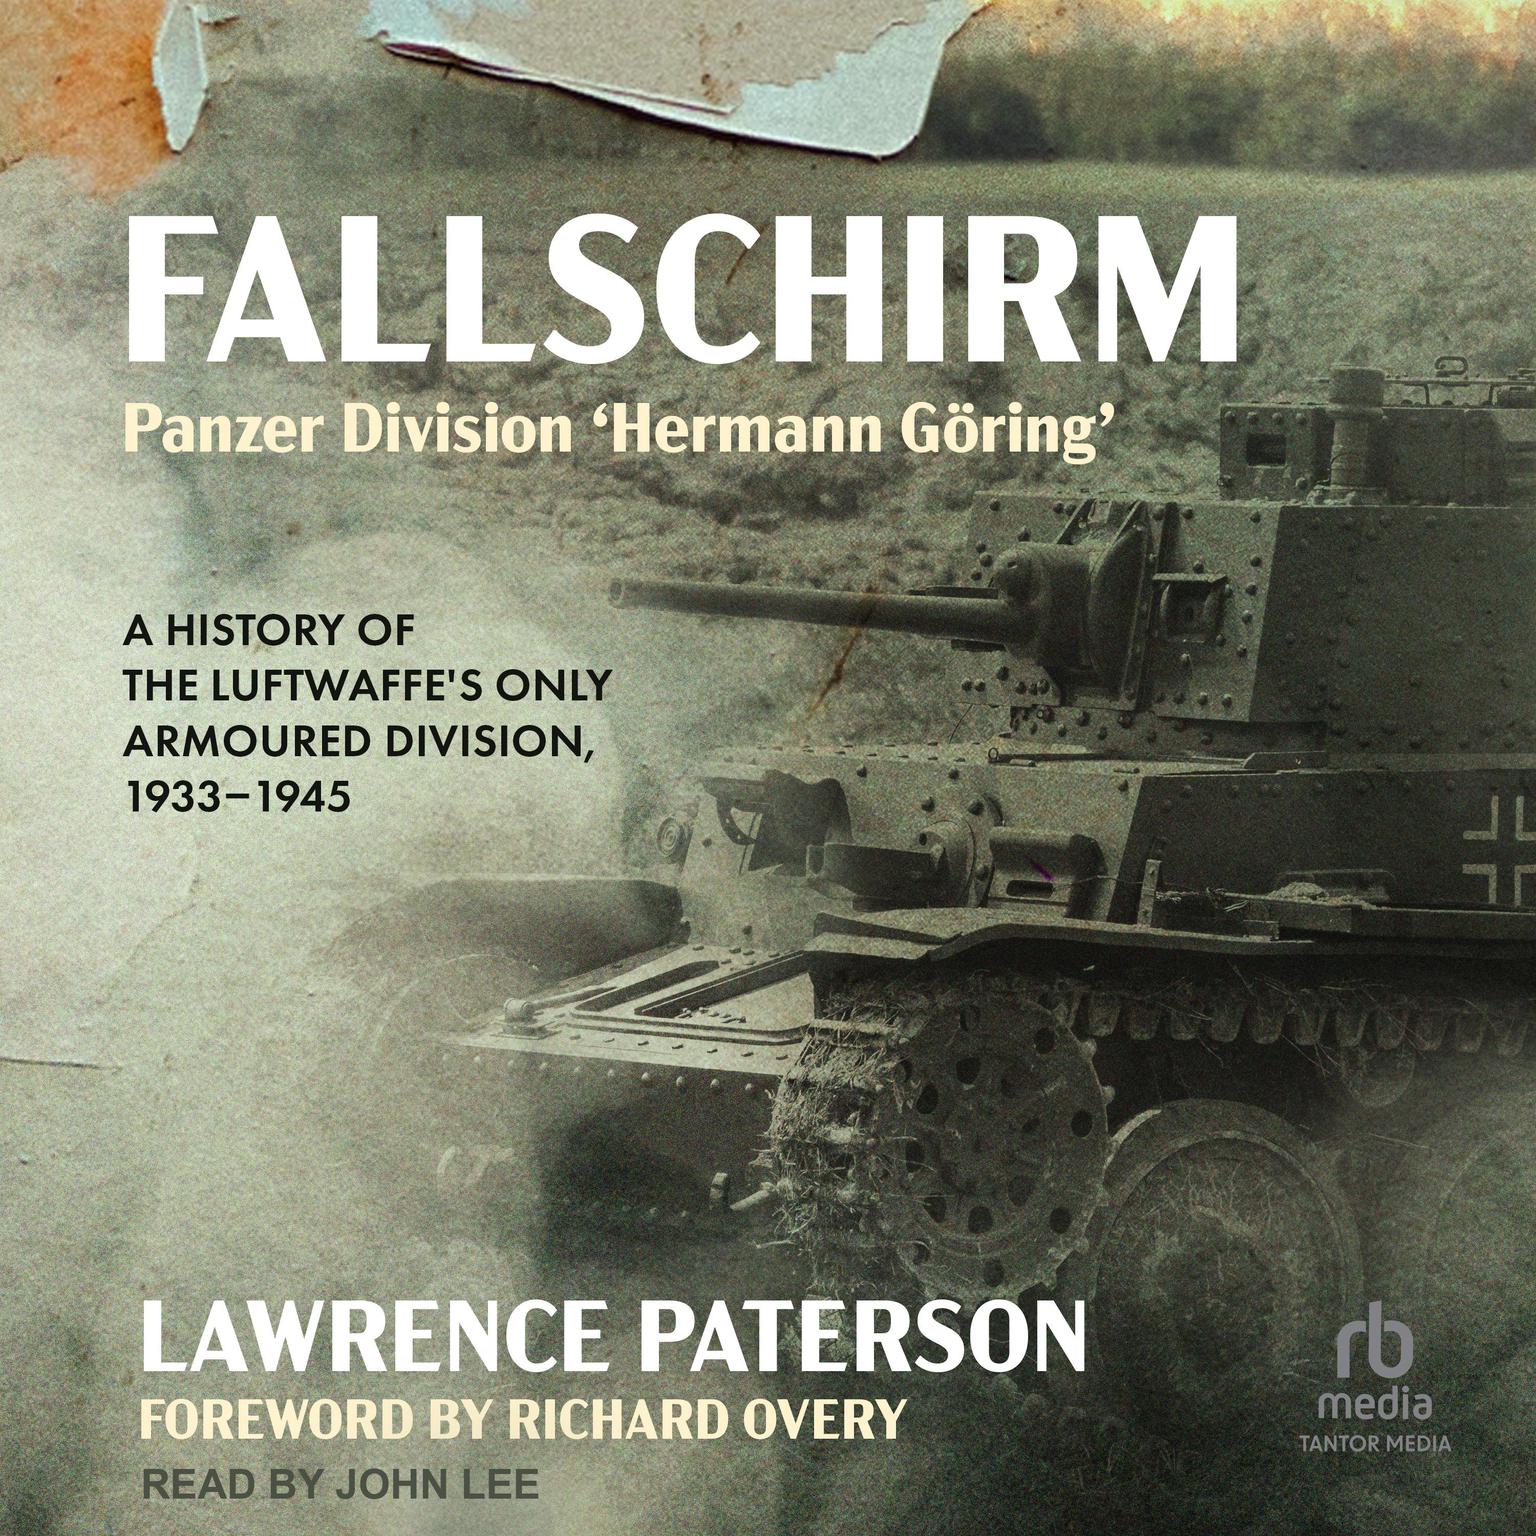 Fallschirm-Panzer Division Hermann Göring: A History of the Luftwaffes Only Armoured Division 1933-1945 Audiobook, by Lawrence Paterson